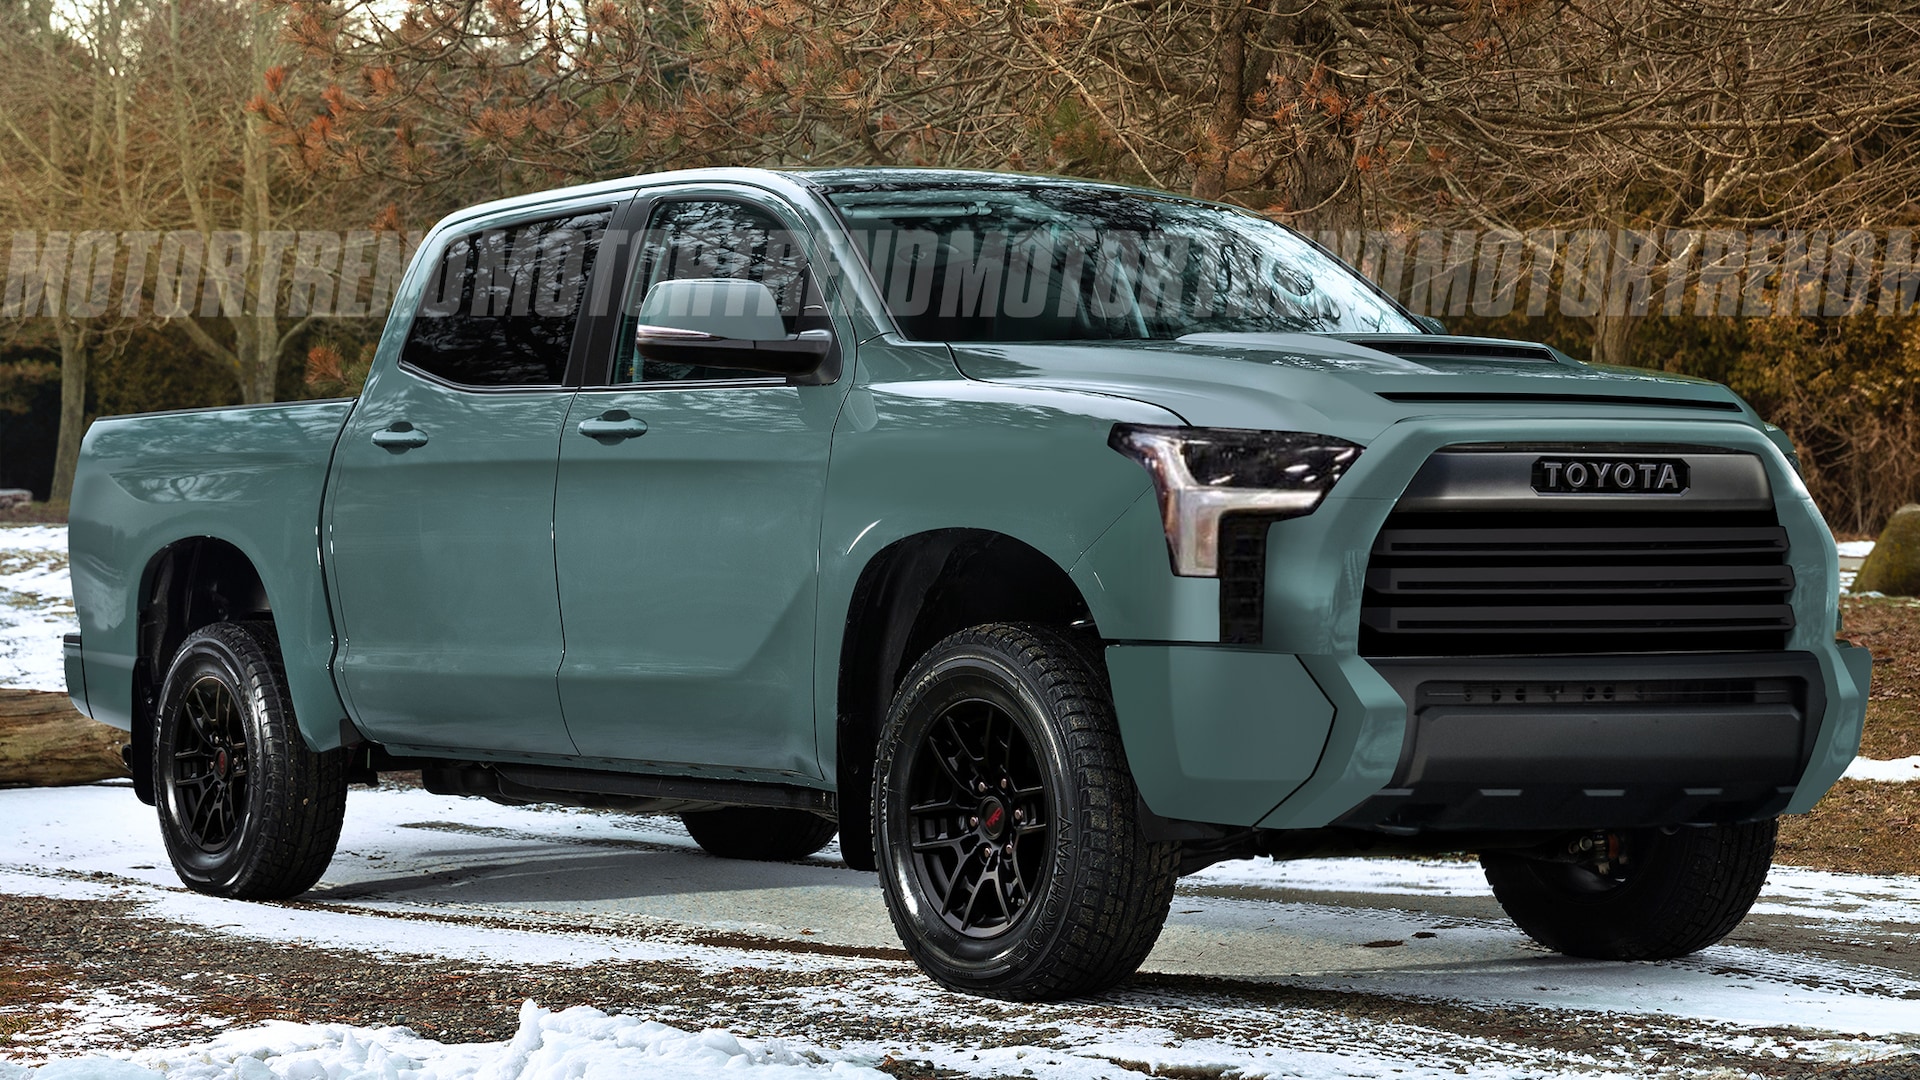 2022 Toyota Tundra: What We Know About the Next One